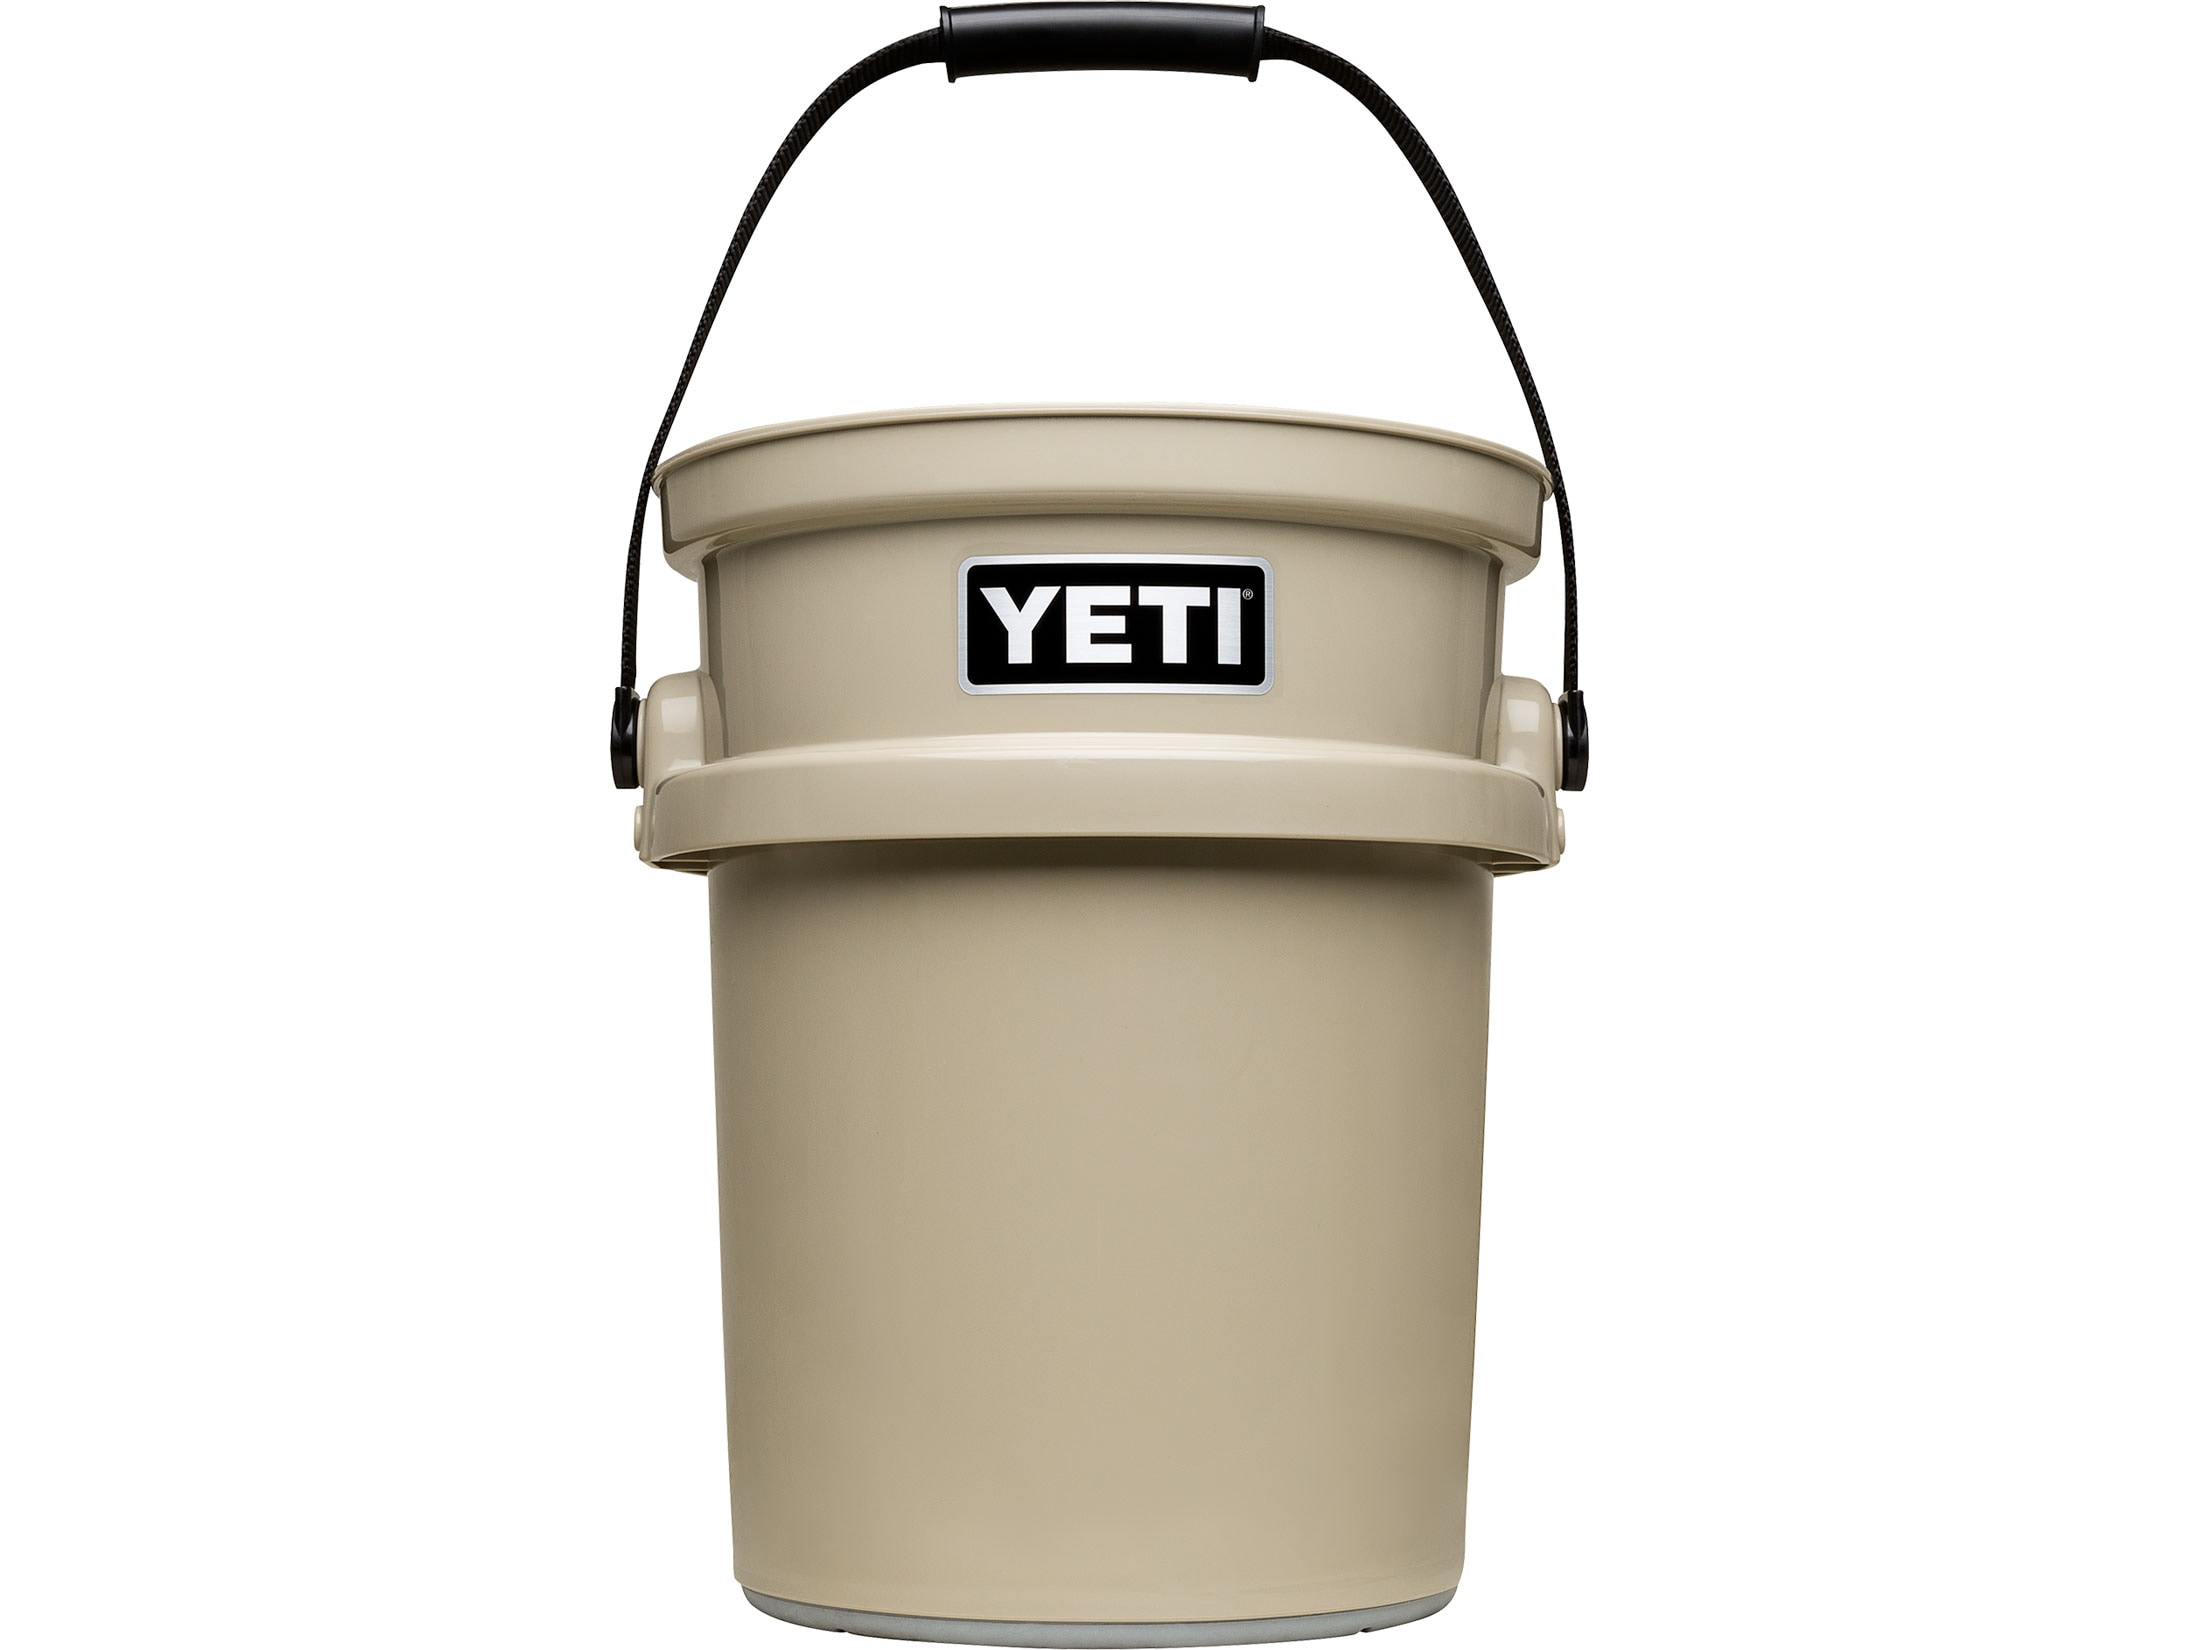 Gave in and got the Loadout bucket and lid. They are 25% off right